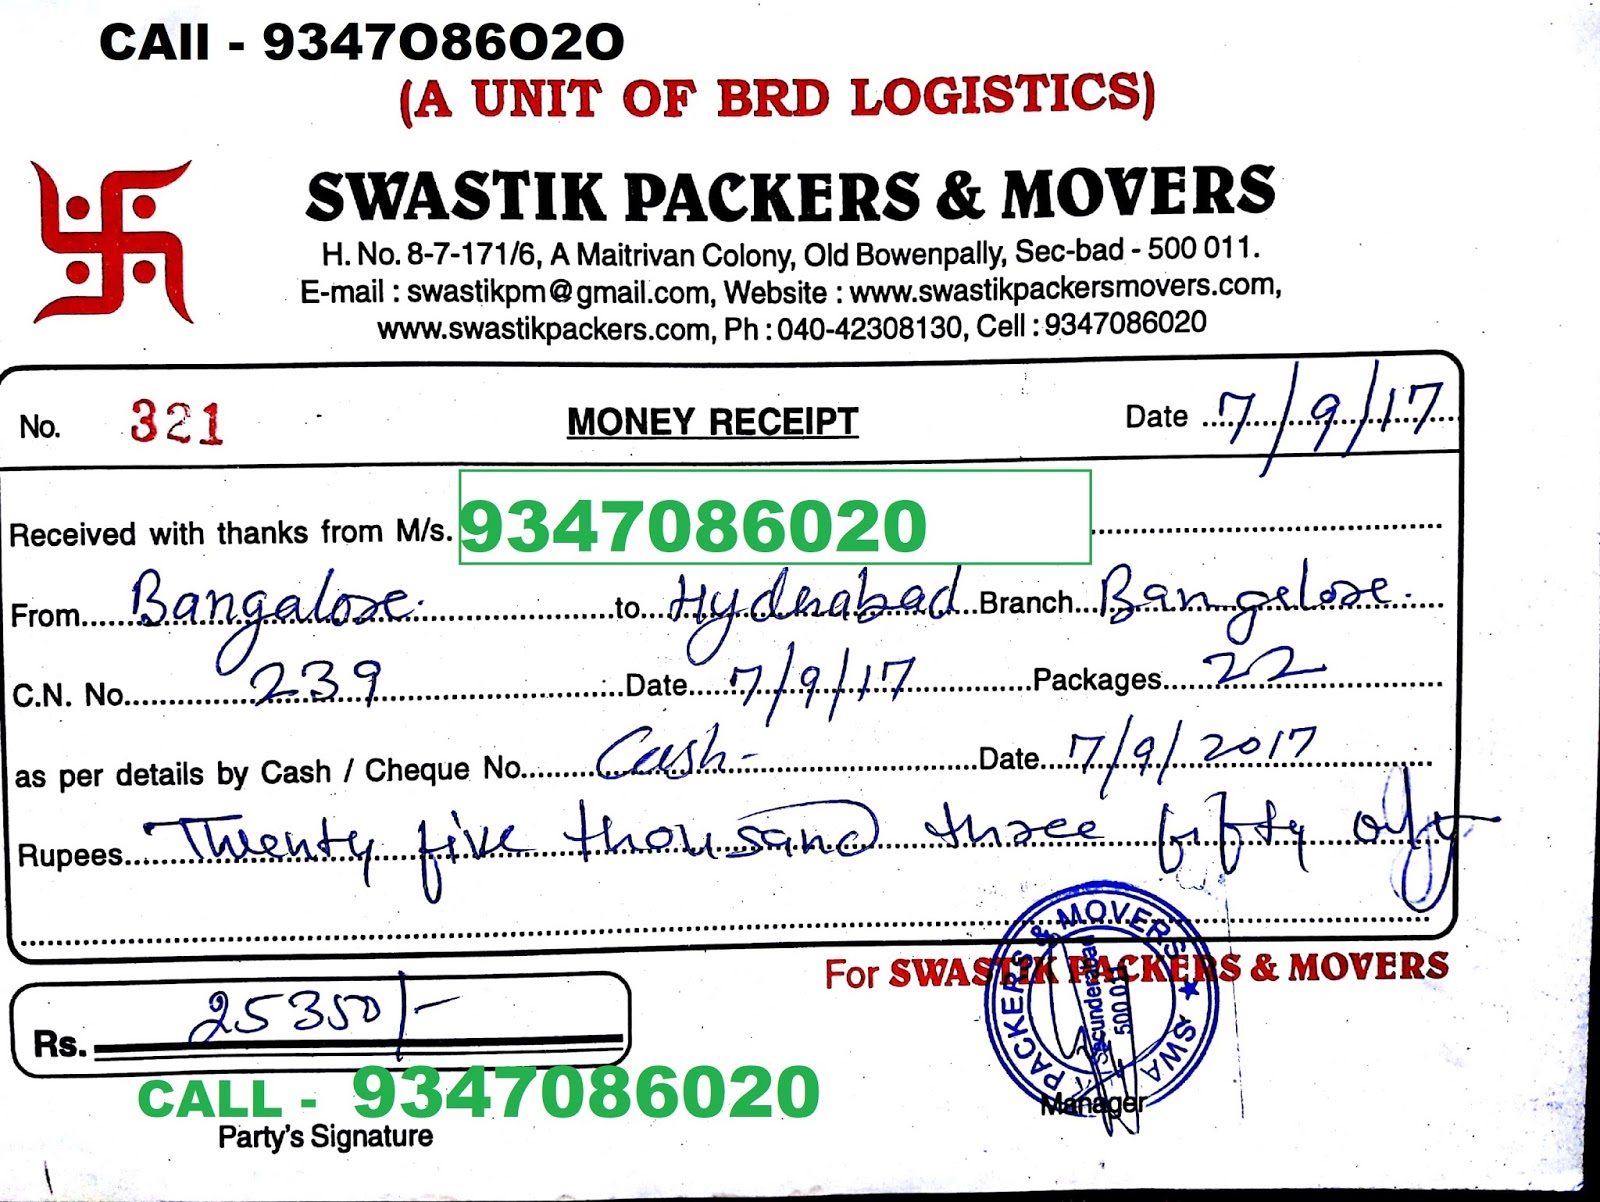 Packers And Movers Gst Bill For Claim Hyderabad Pune Delhi Pdf Mumbai Gst Agarwal Transport 